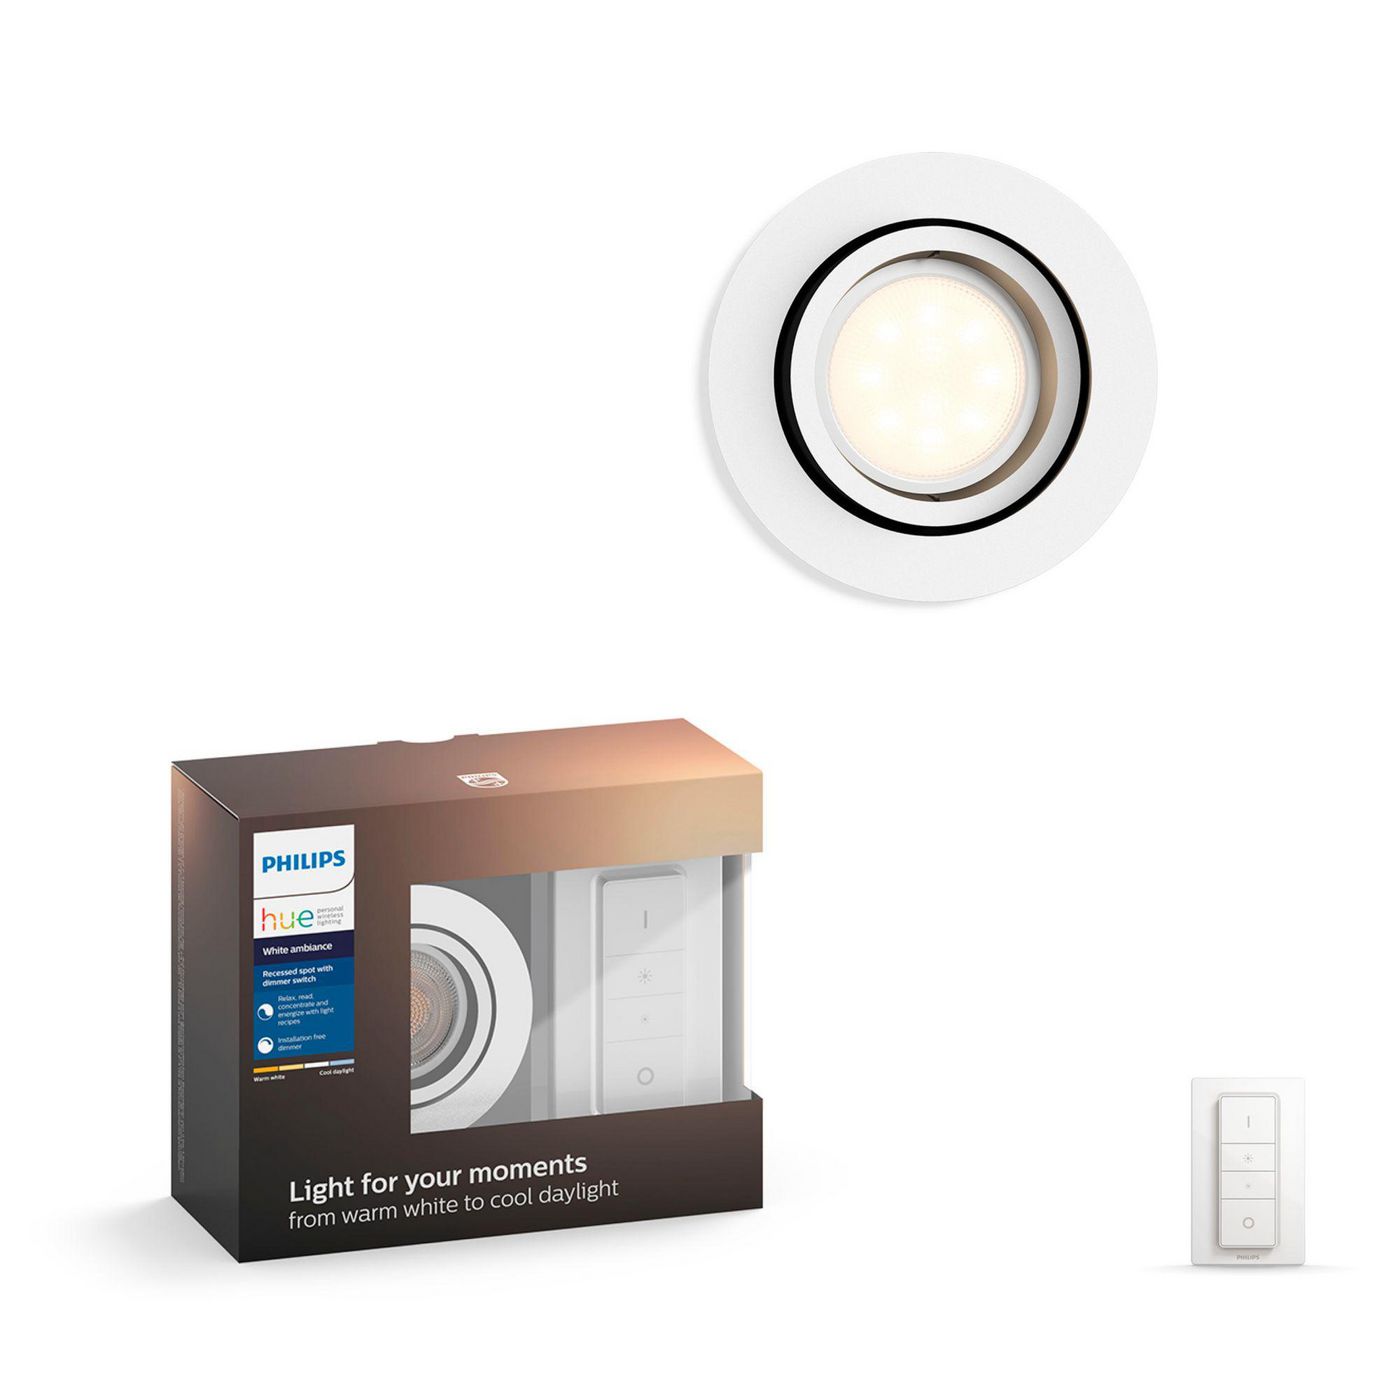 Philips-by-Signify 915005425301 Hue Milliskin build-in spot 